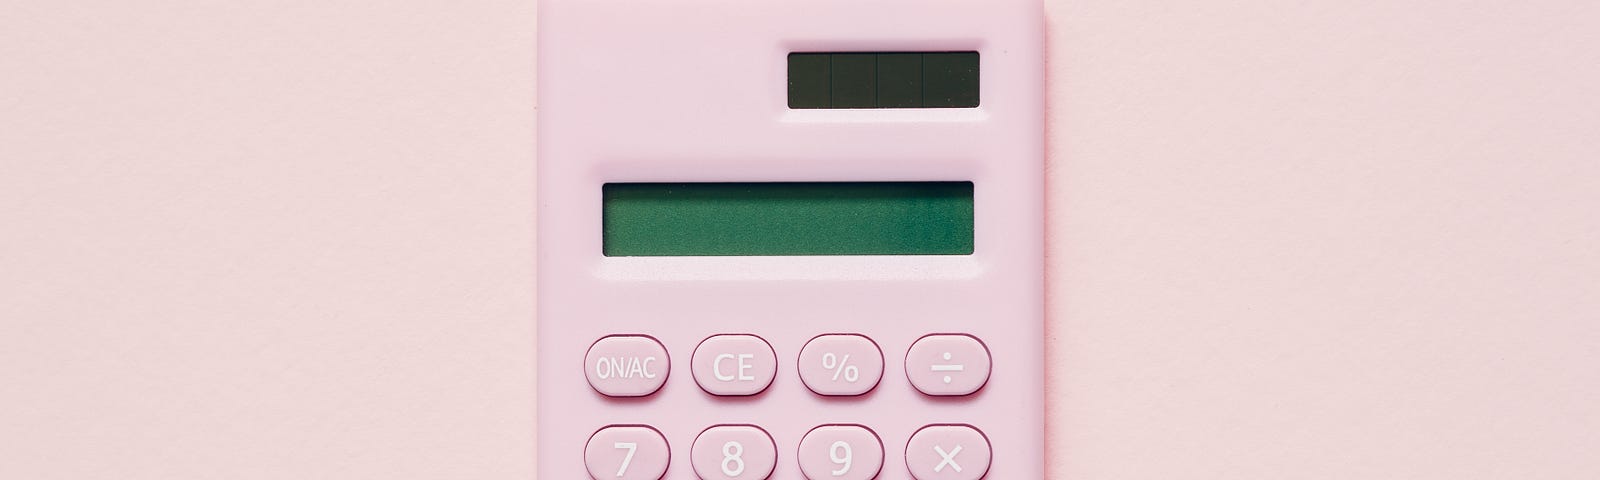 Image shows a pink calculator with a blank screen.